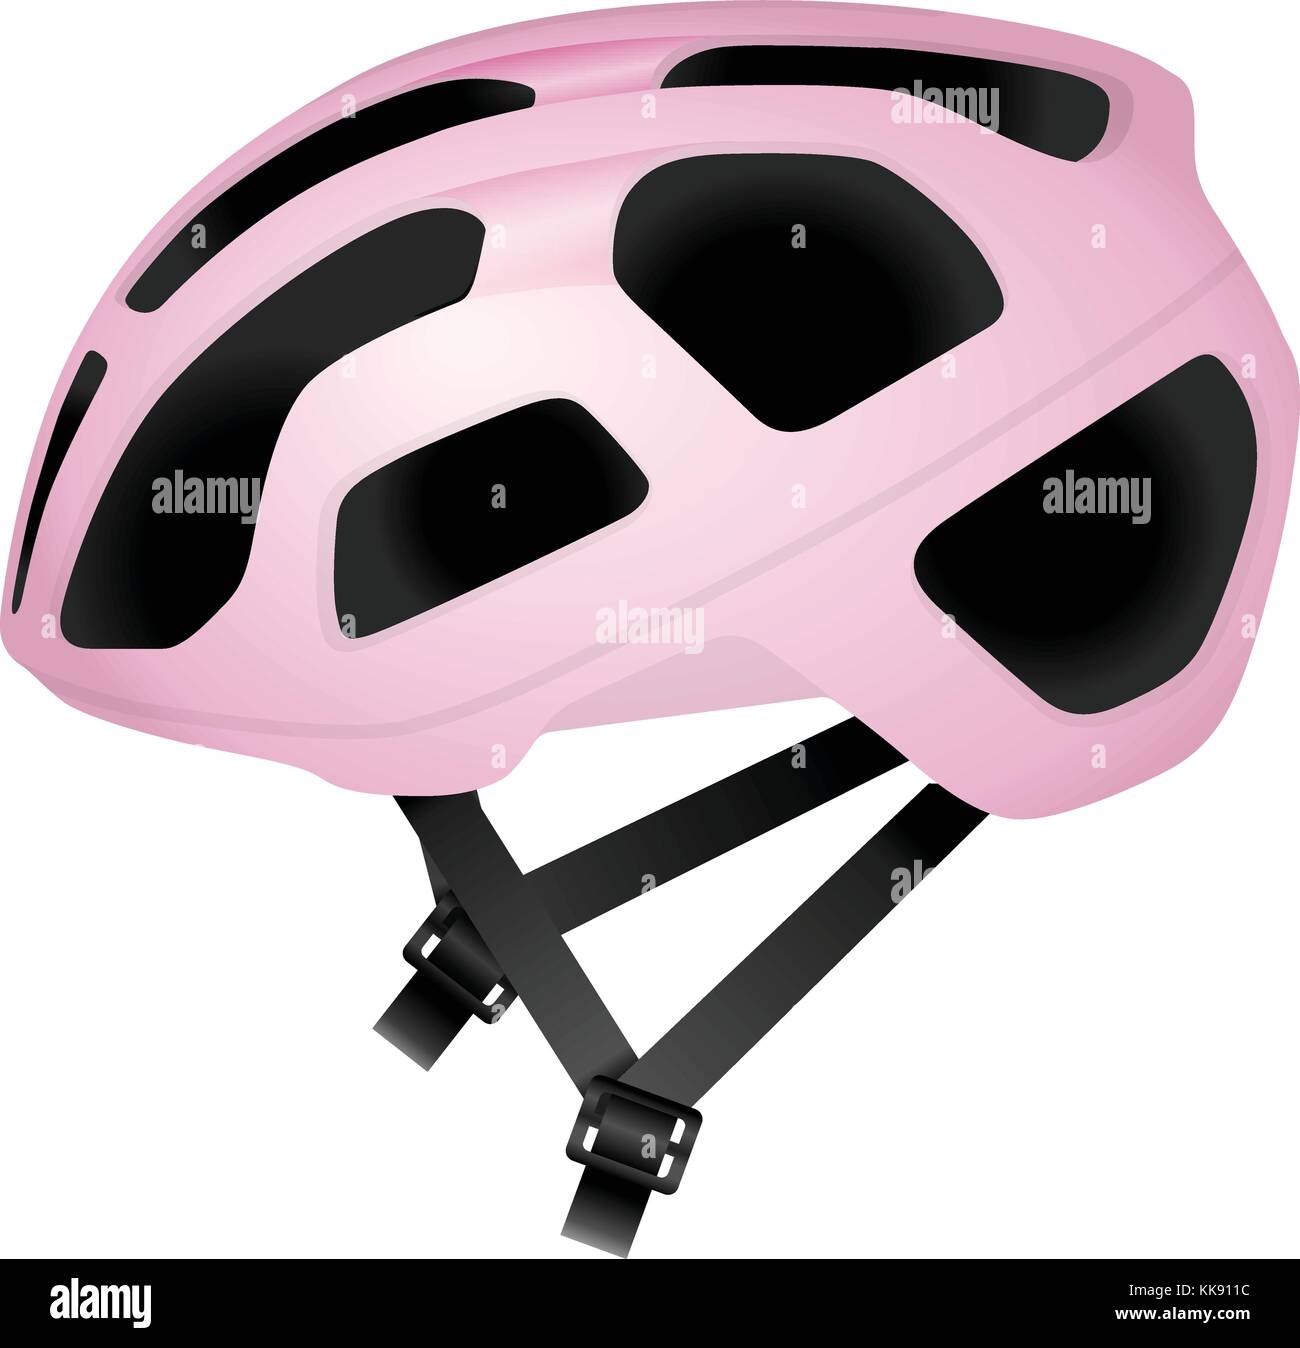 Cycling helmet on a white background. Stock Vector